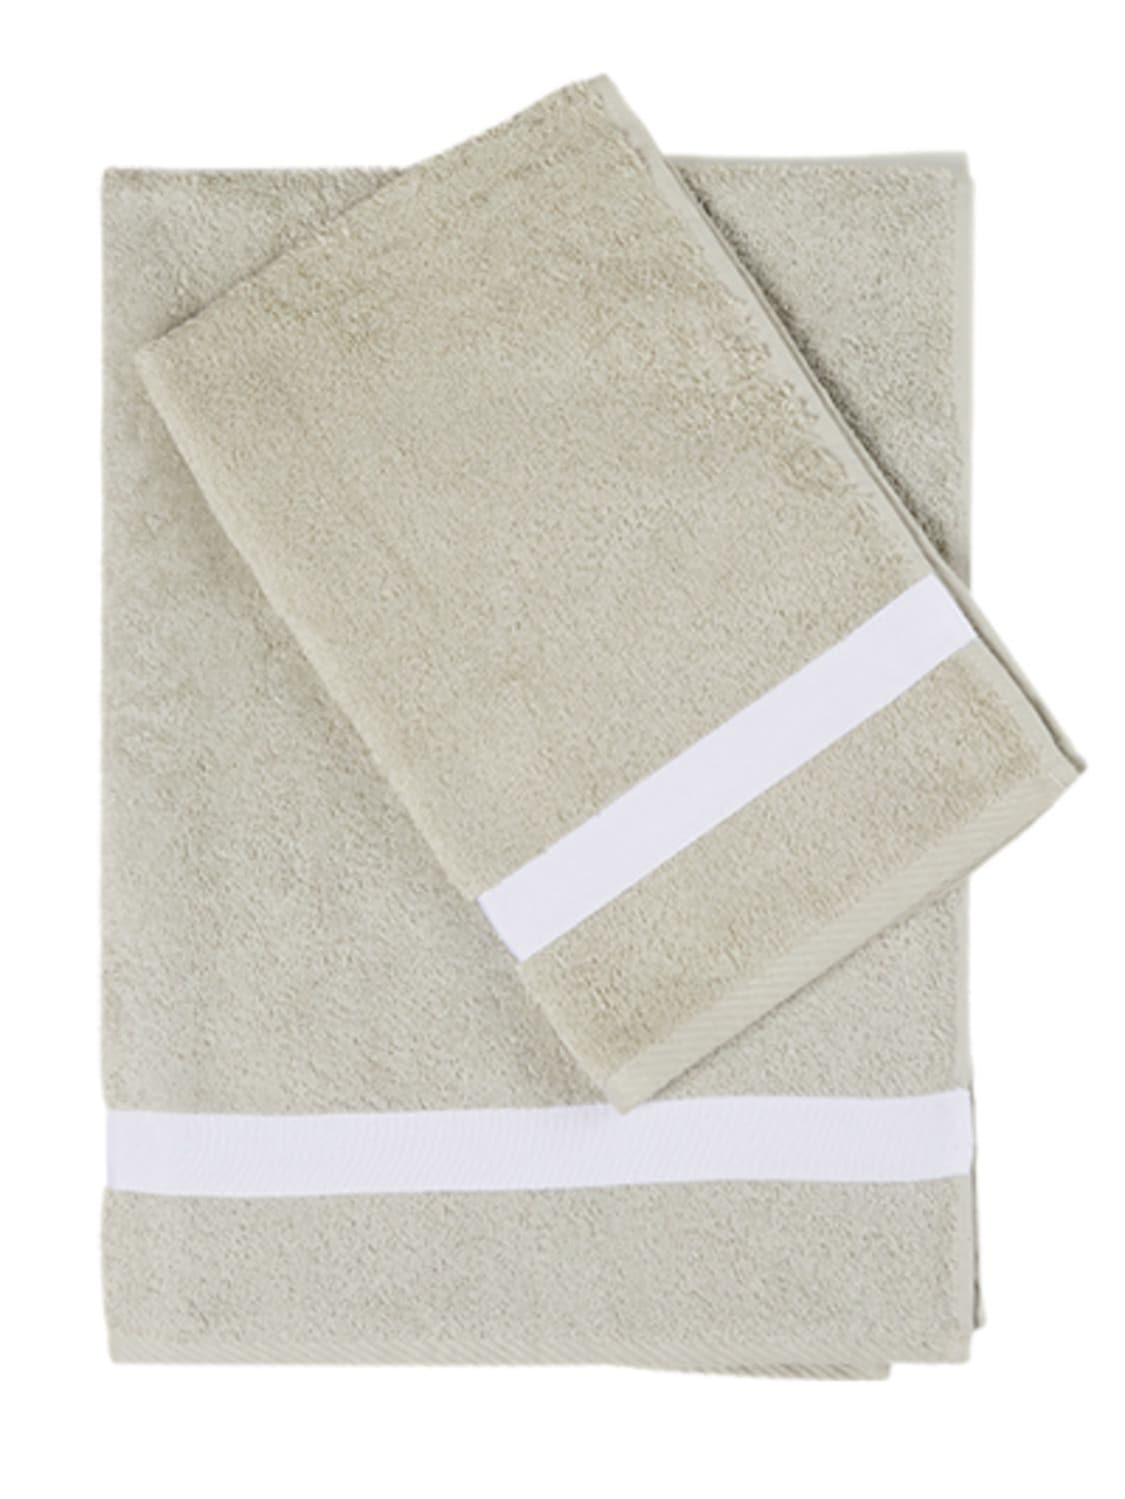 Alessandro Di Marco Set Of 2 Cotton Terrycloth Towels In Grey,white